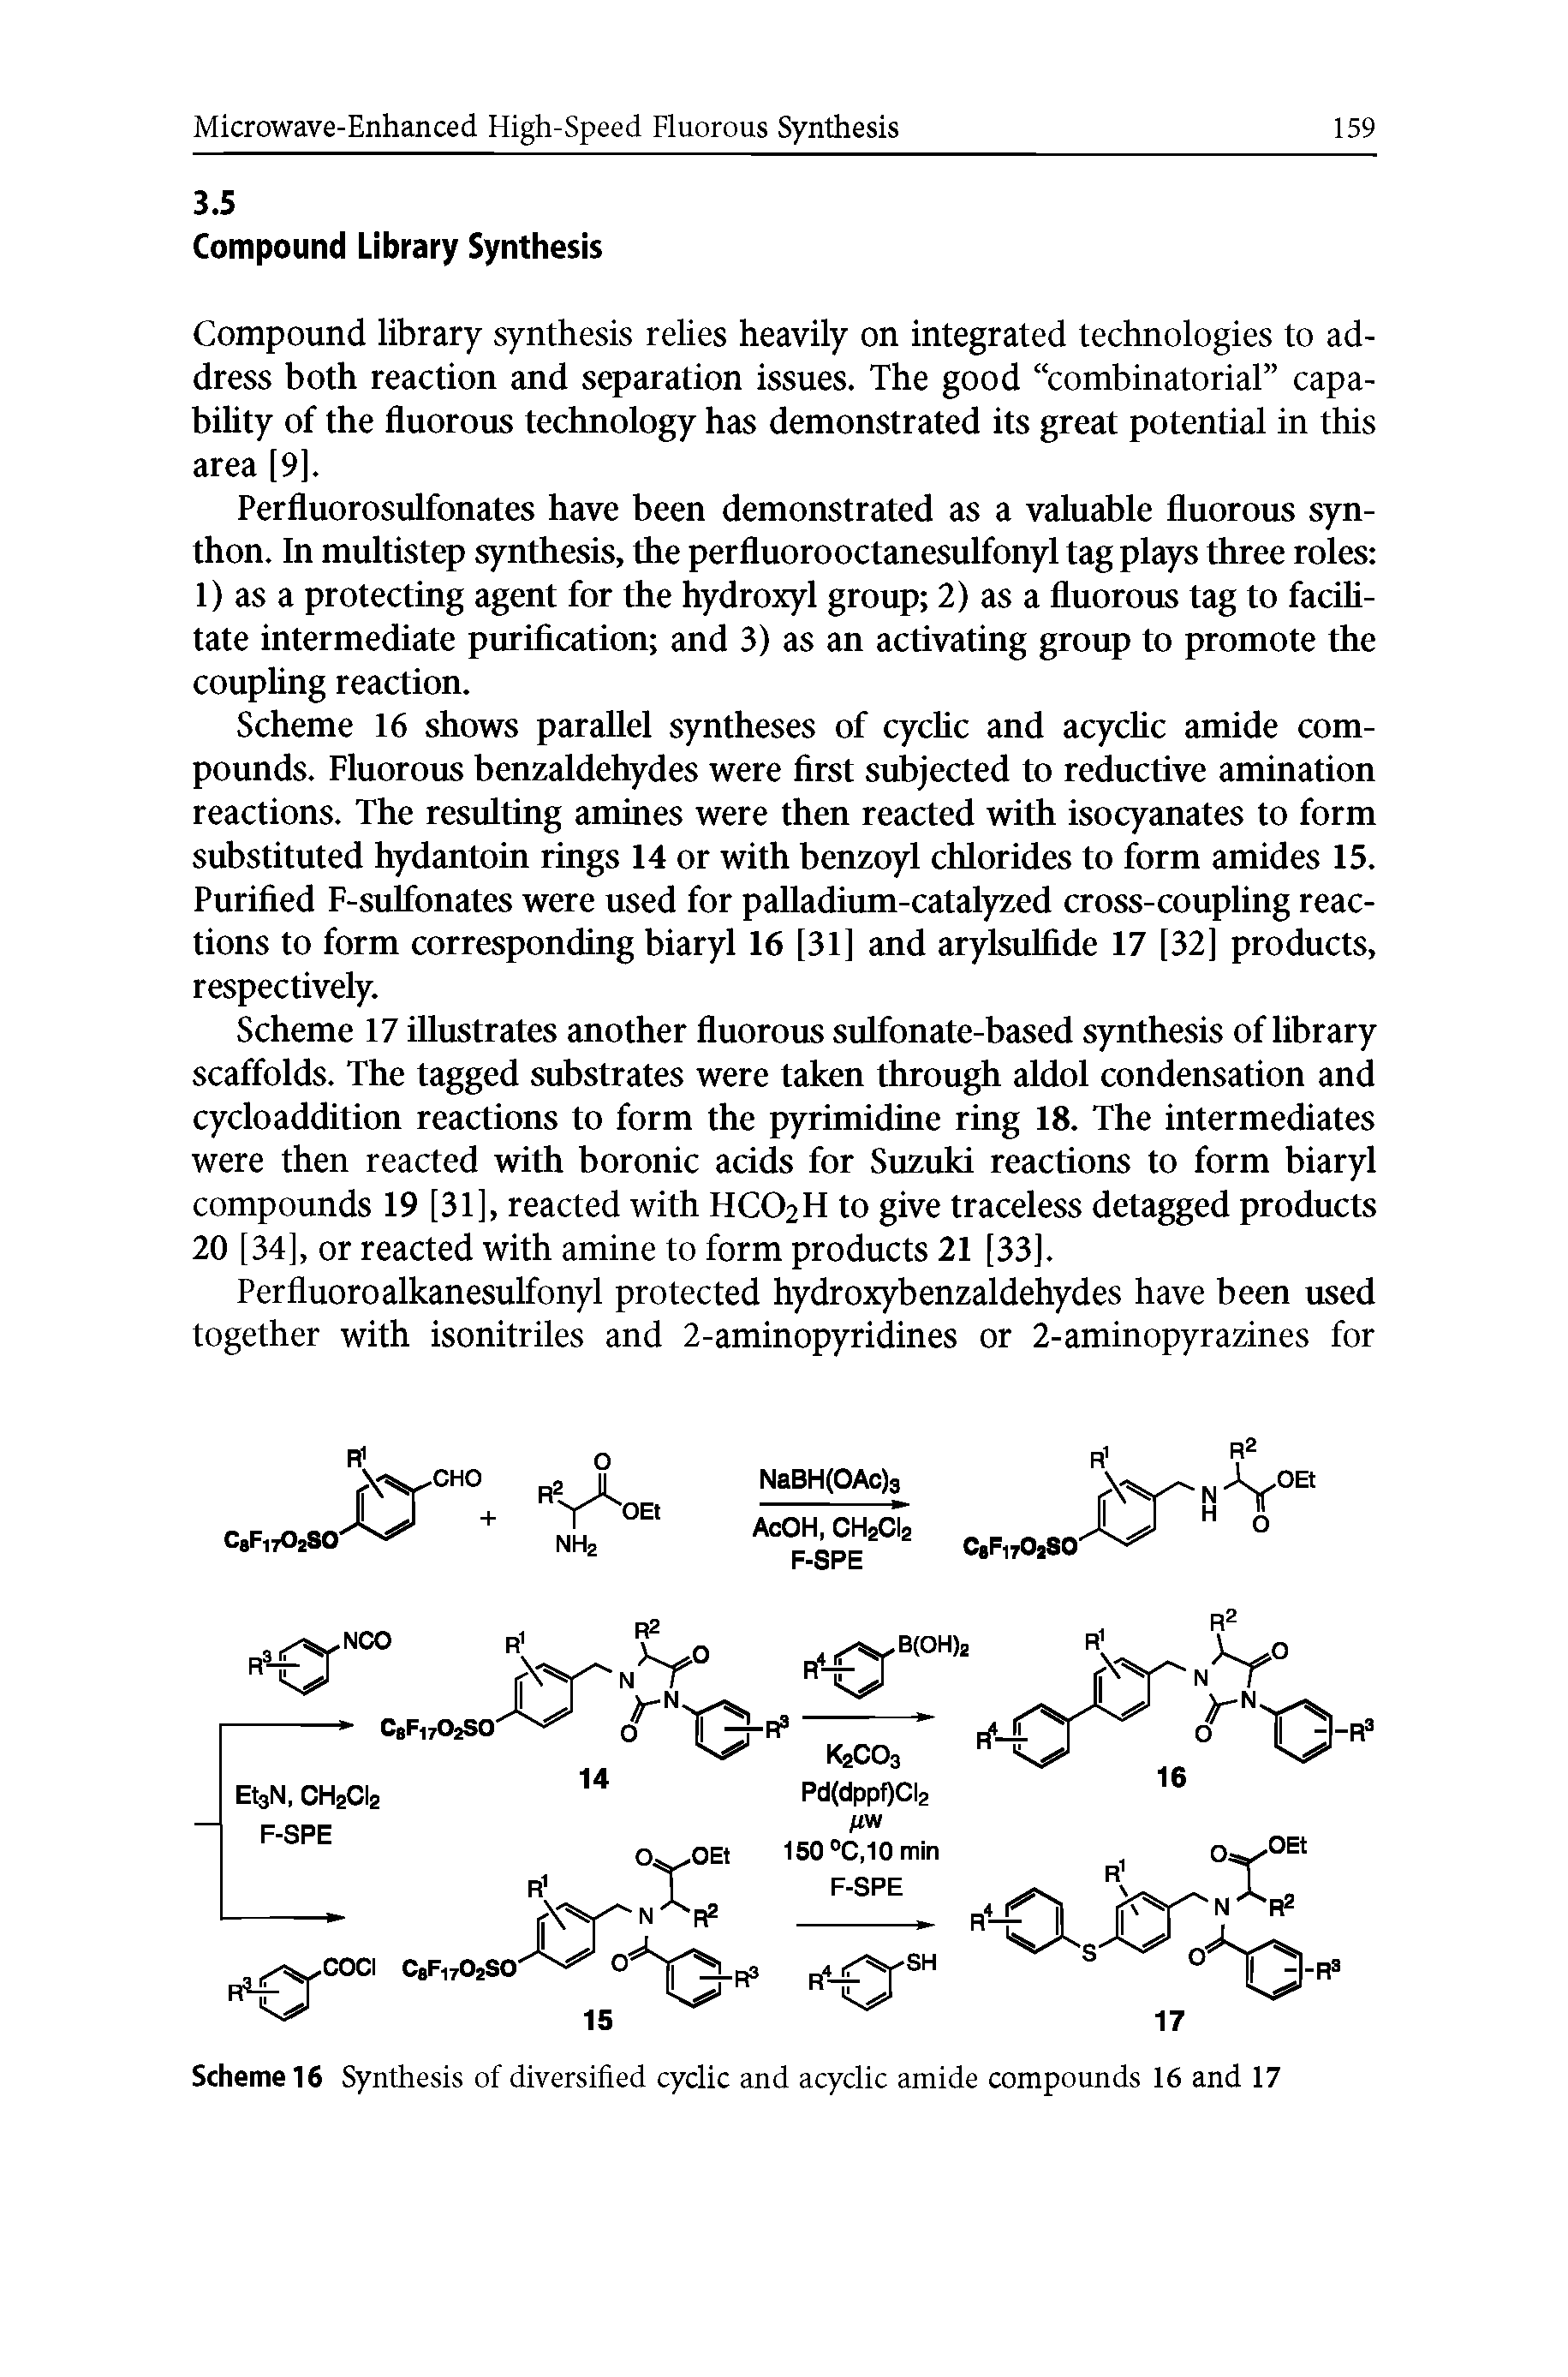 Scheme 16 Synthesis of diversified cyclic and acyclic amide compounds 16 and 17...